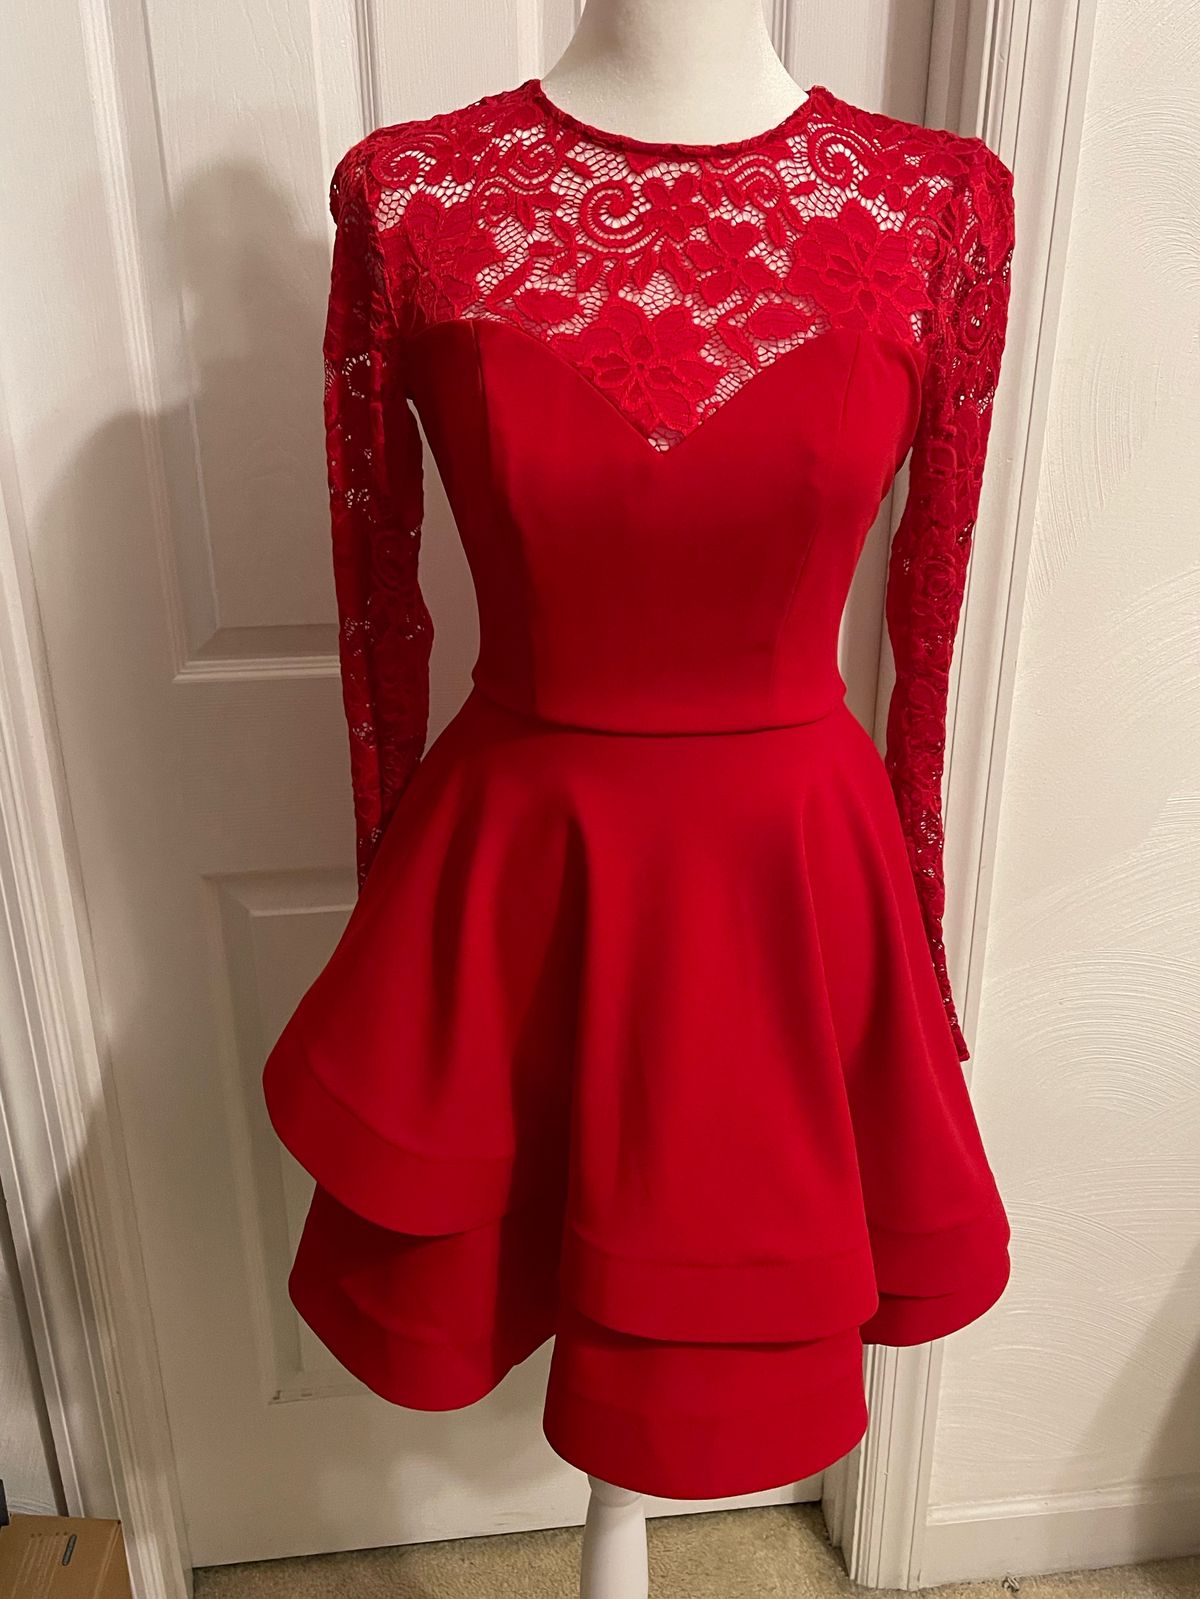 B. Darlin Size 2 Lace Red Cocktail Dress on Queenly